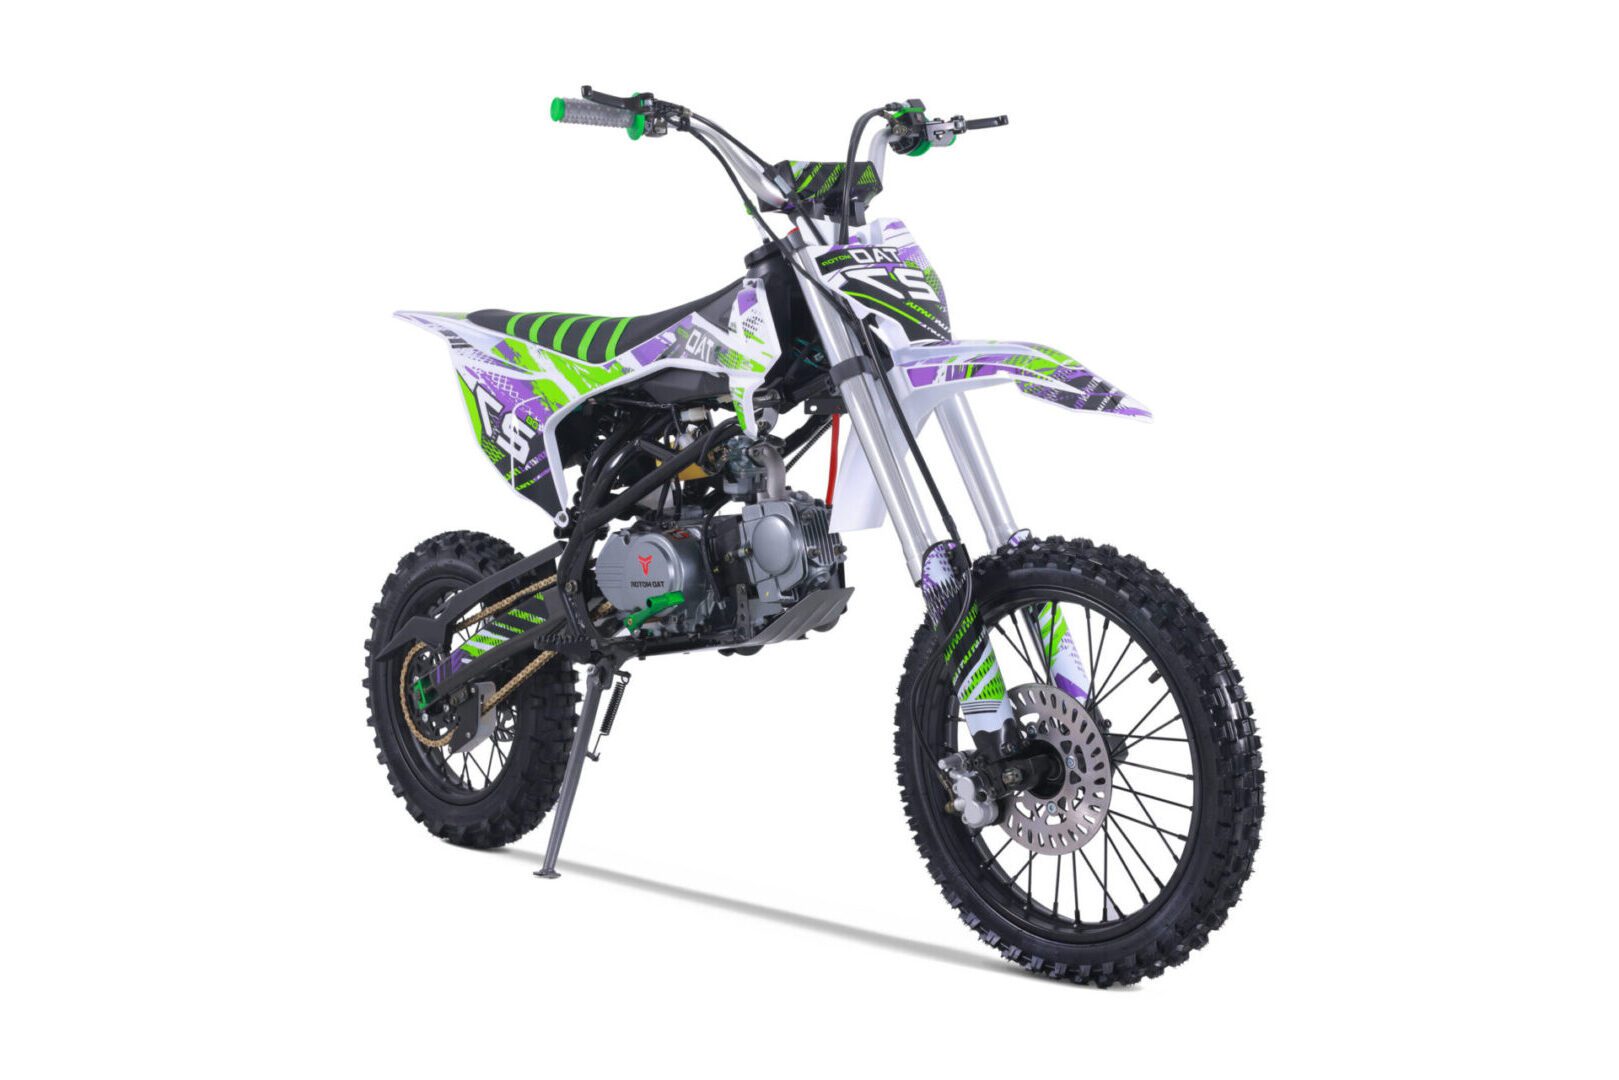 A dirt bike is shown with purple and green paint.